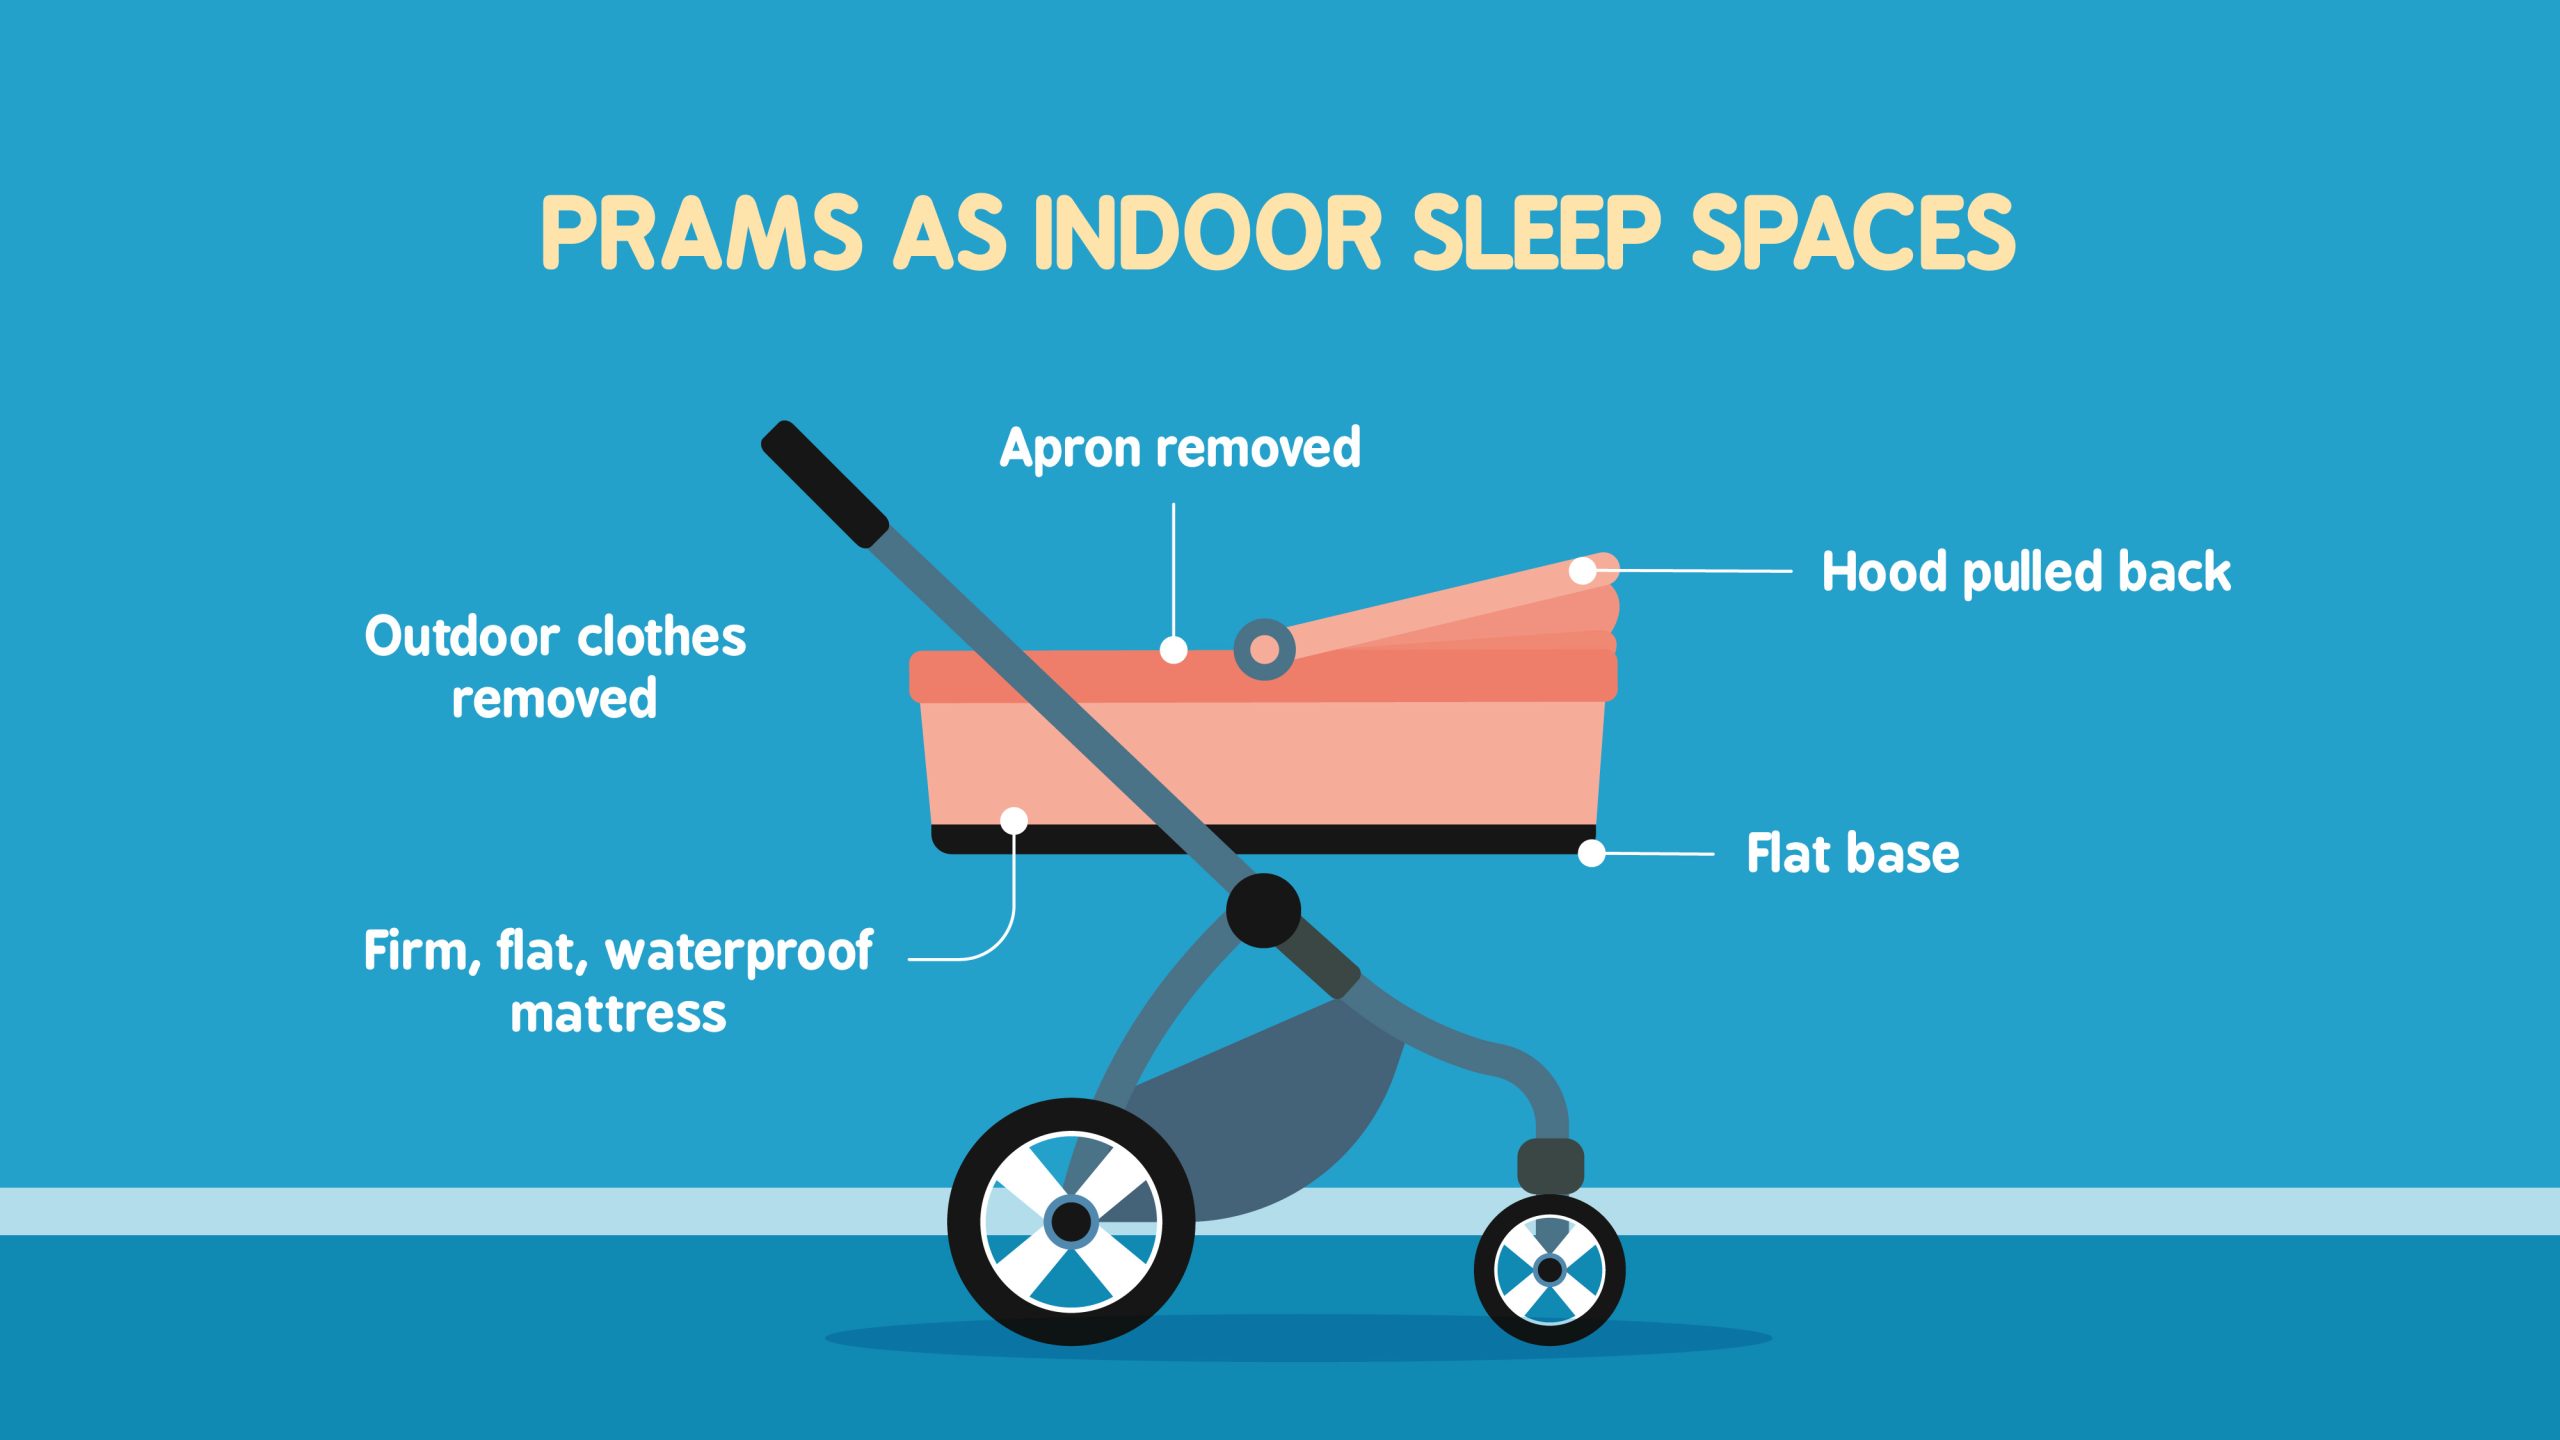 Pram as indoor sleep space diagram - ideas for when you need a baby to sleep away from home